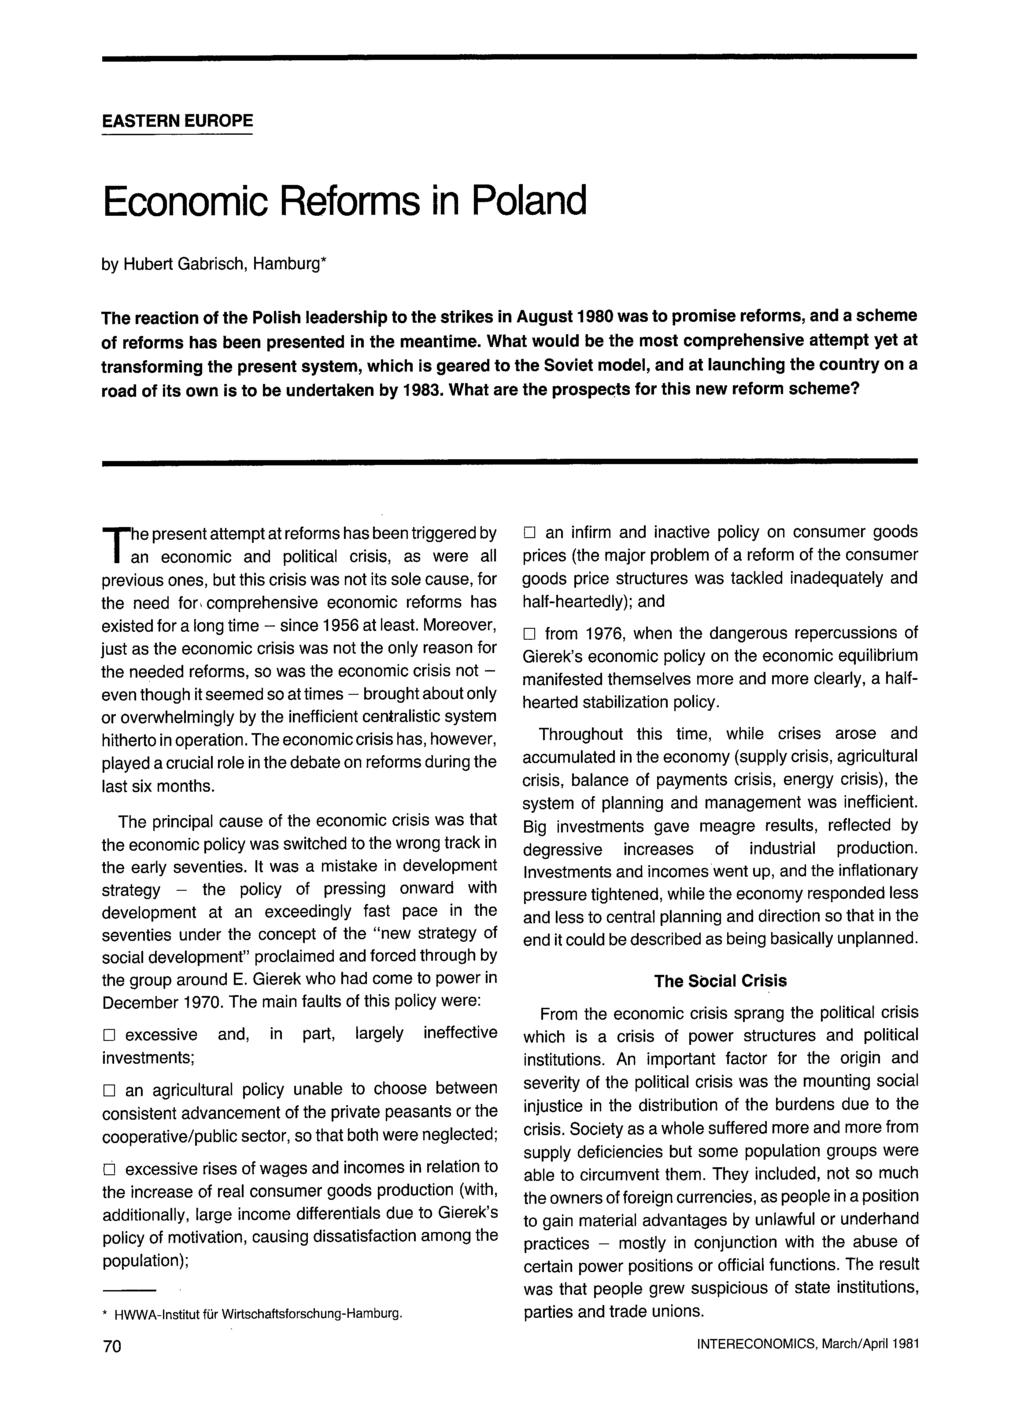 Economic Reforms in Poland by Hubert Gabrisch, Hamburg* The reaction of the Polish leadership to the strikes in August 1980 was to promise reforms, and a scheme of reforms has been presented in the